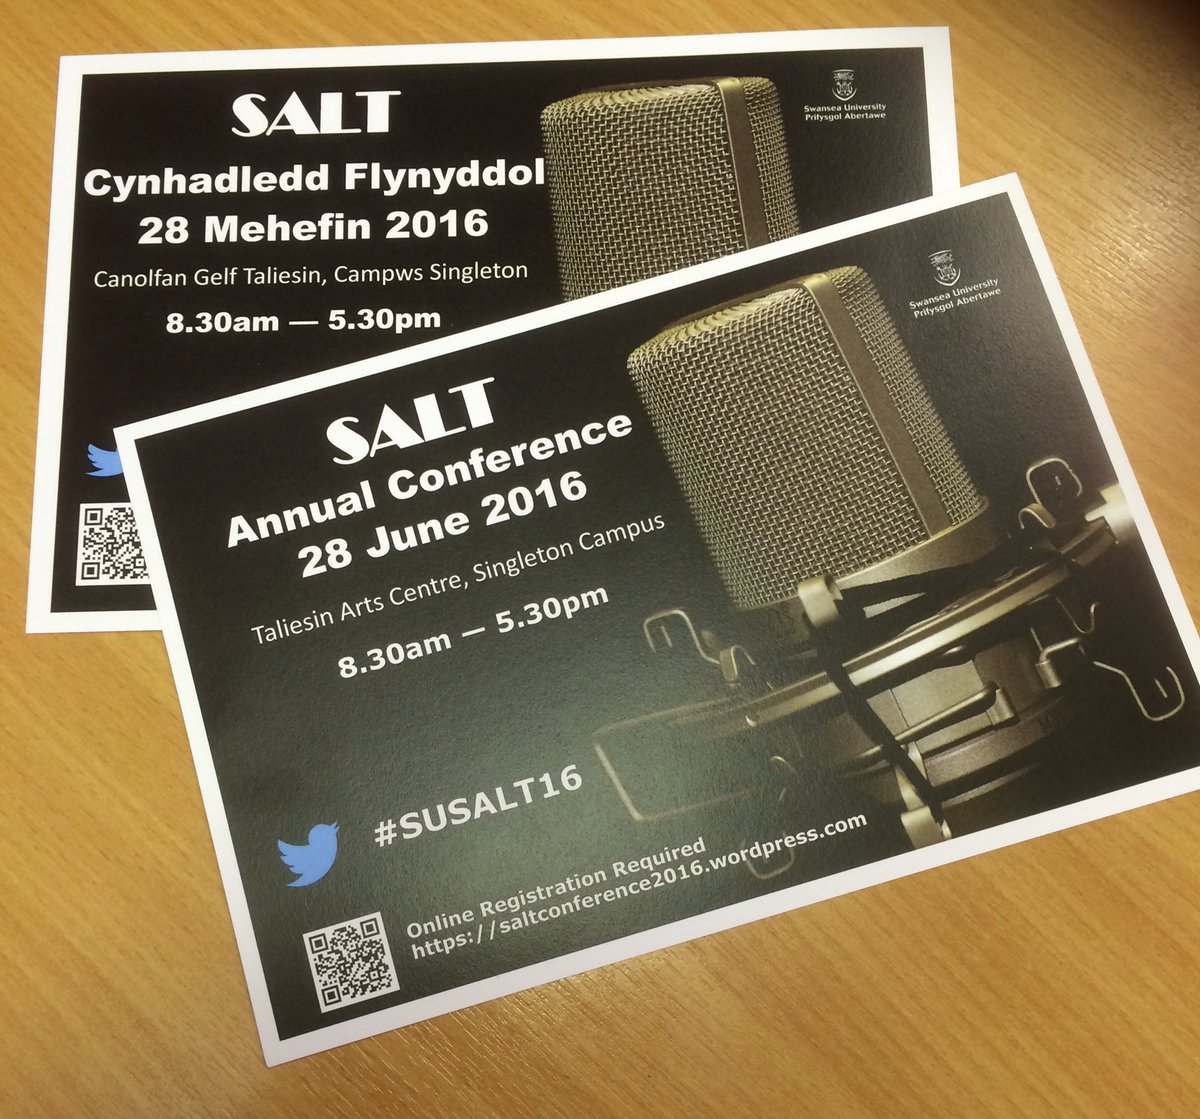 Working hard to finalise our jam packed programme for #susalt16 ... Only 6 days to go now ! https://t.co/1ru7pW77Qz